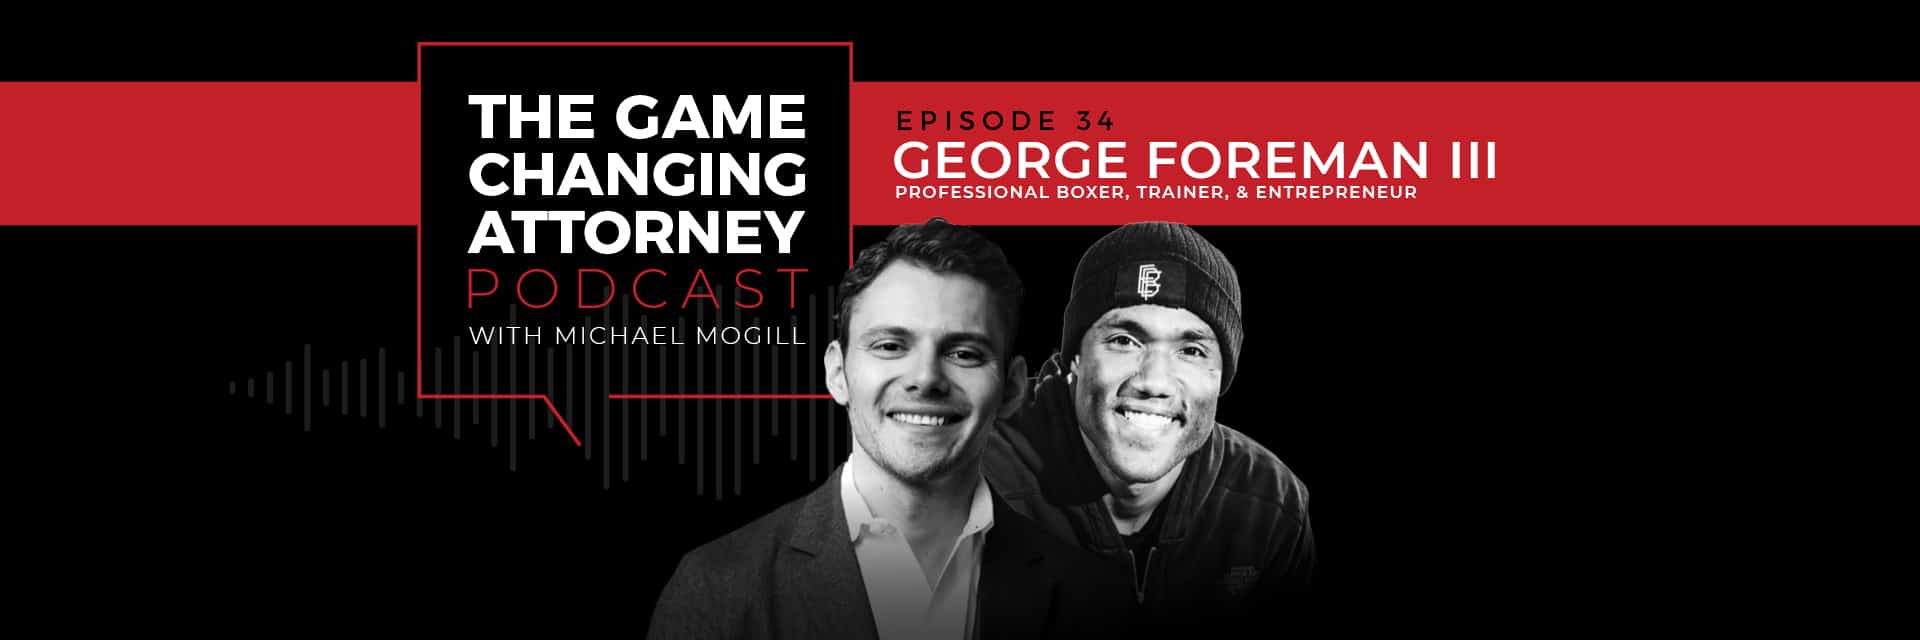 George Foreman III - The Game Changing Attorney Podcast - Desktop